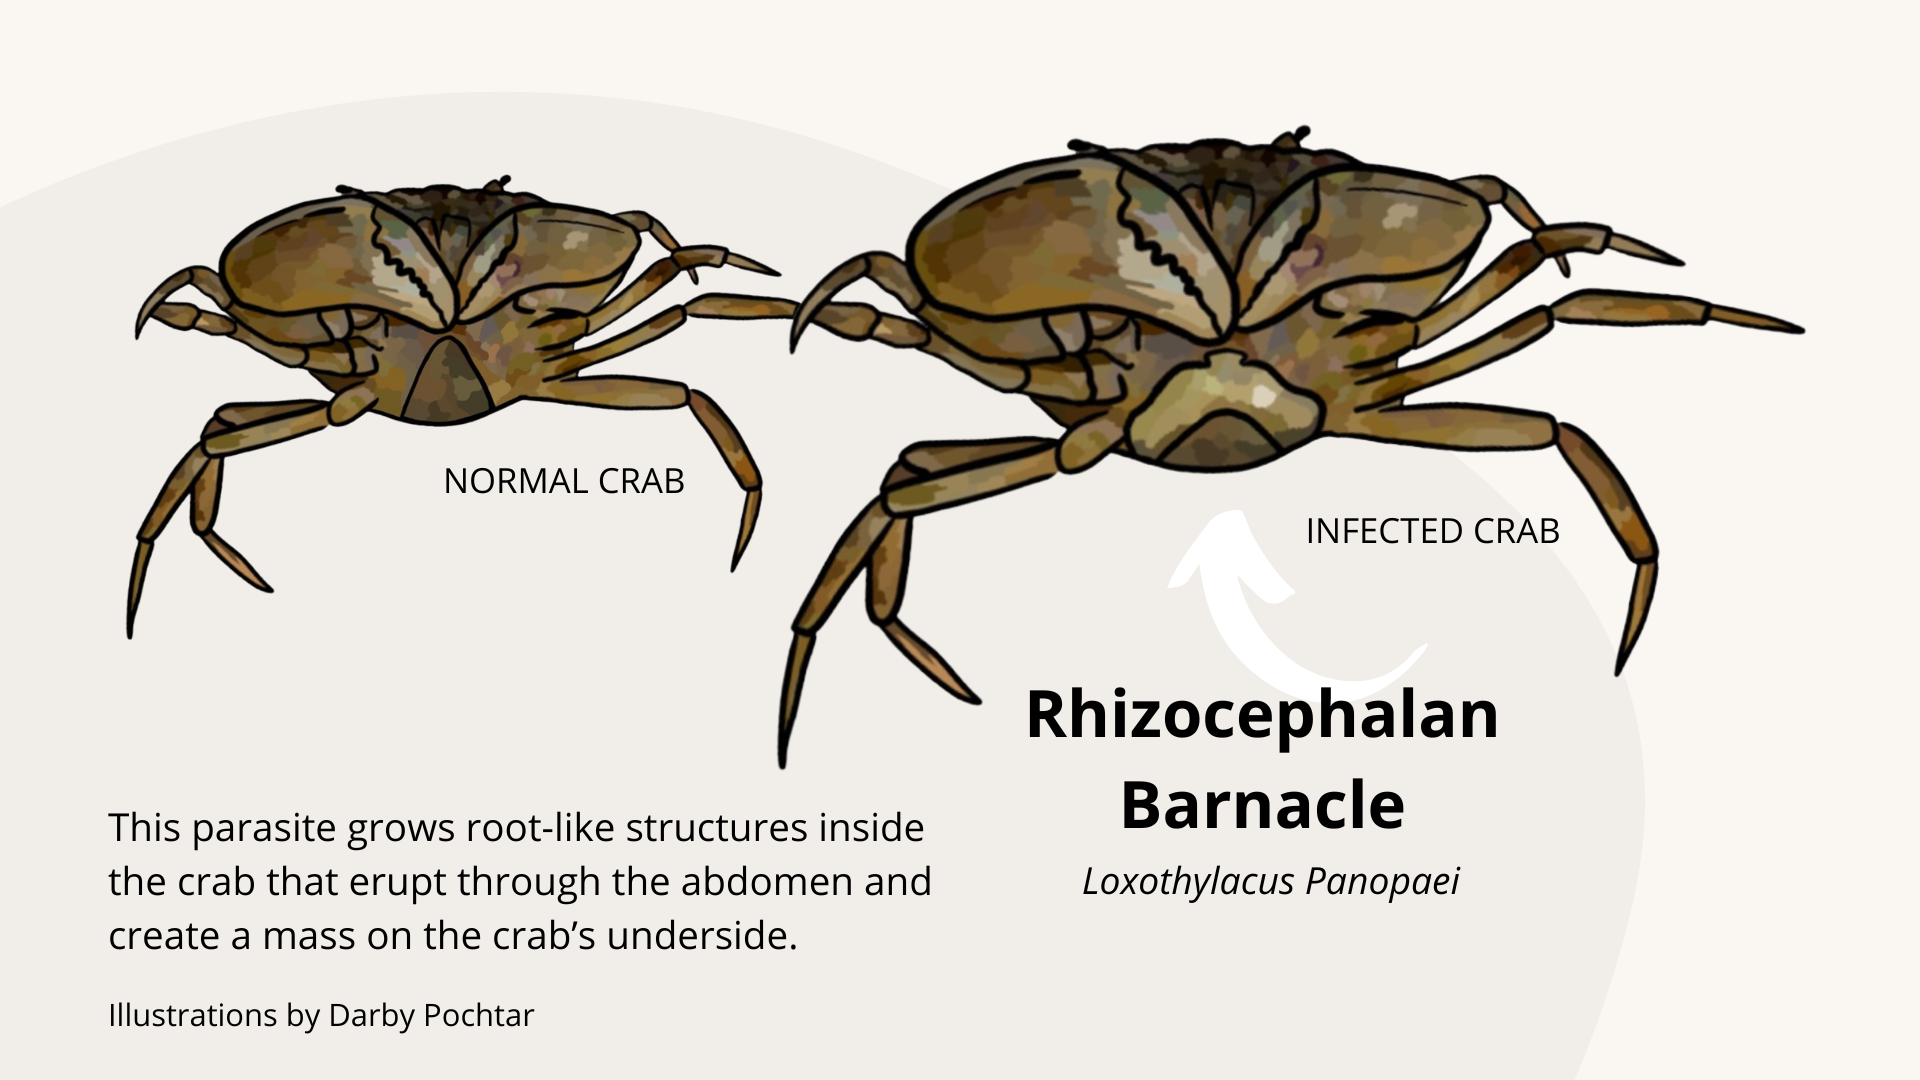 Rhizocephalan  Barnacle: This parasite grows root-like structures inside the crab that erupt through the abdomen and create a mass on the crab’s underside. Illustrations by Darby Pochtar